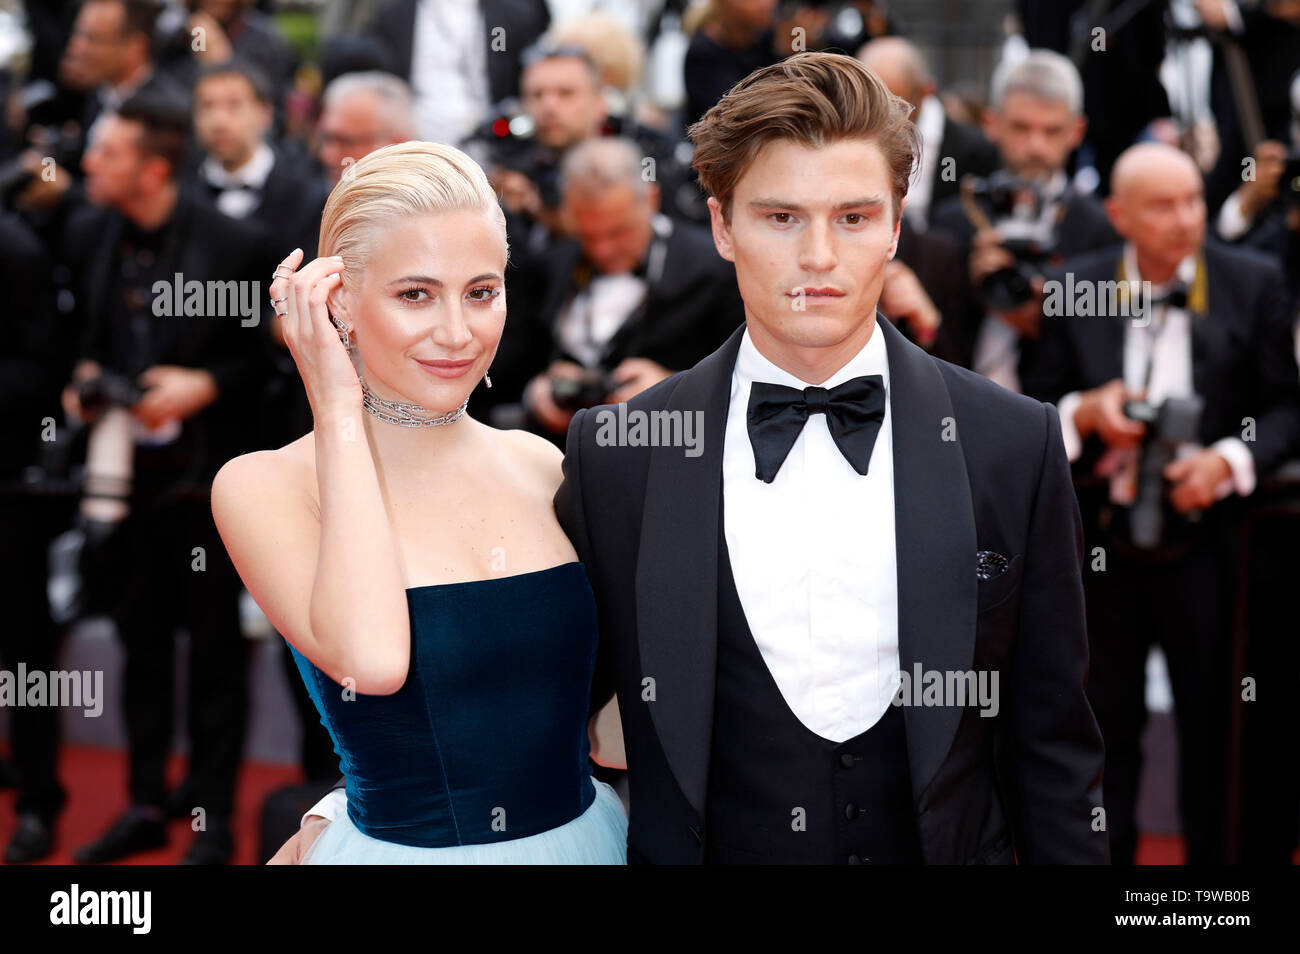 Cannes, France. 20th May, 2019. Pixie Lott and Oliver Cheshir attending the 'La belle époque' premiere during the 72nd Cannes Film Festival at the Palais des Festivals on May 20, 2019 in Cannes, France Credit: Geisler-Fotopress GmbH/Alamy Live News Stock Photo